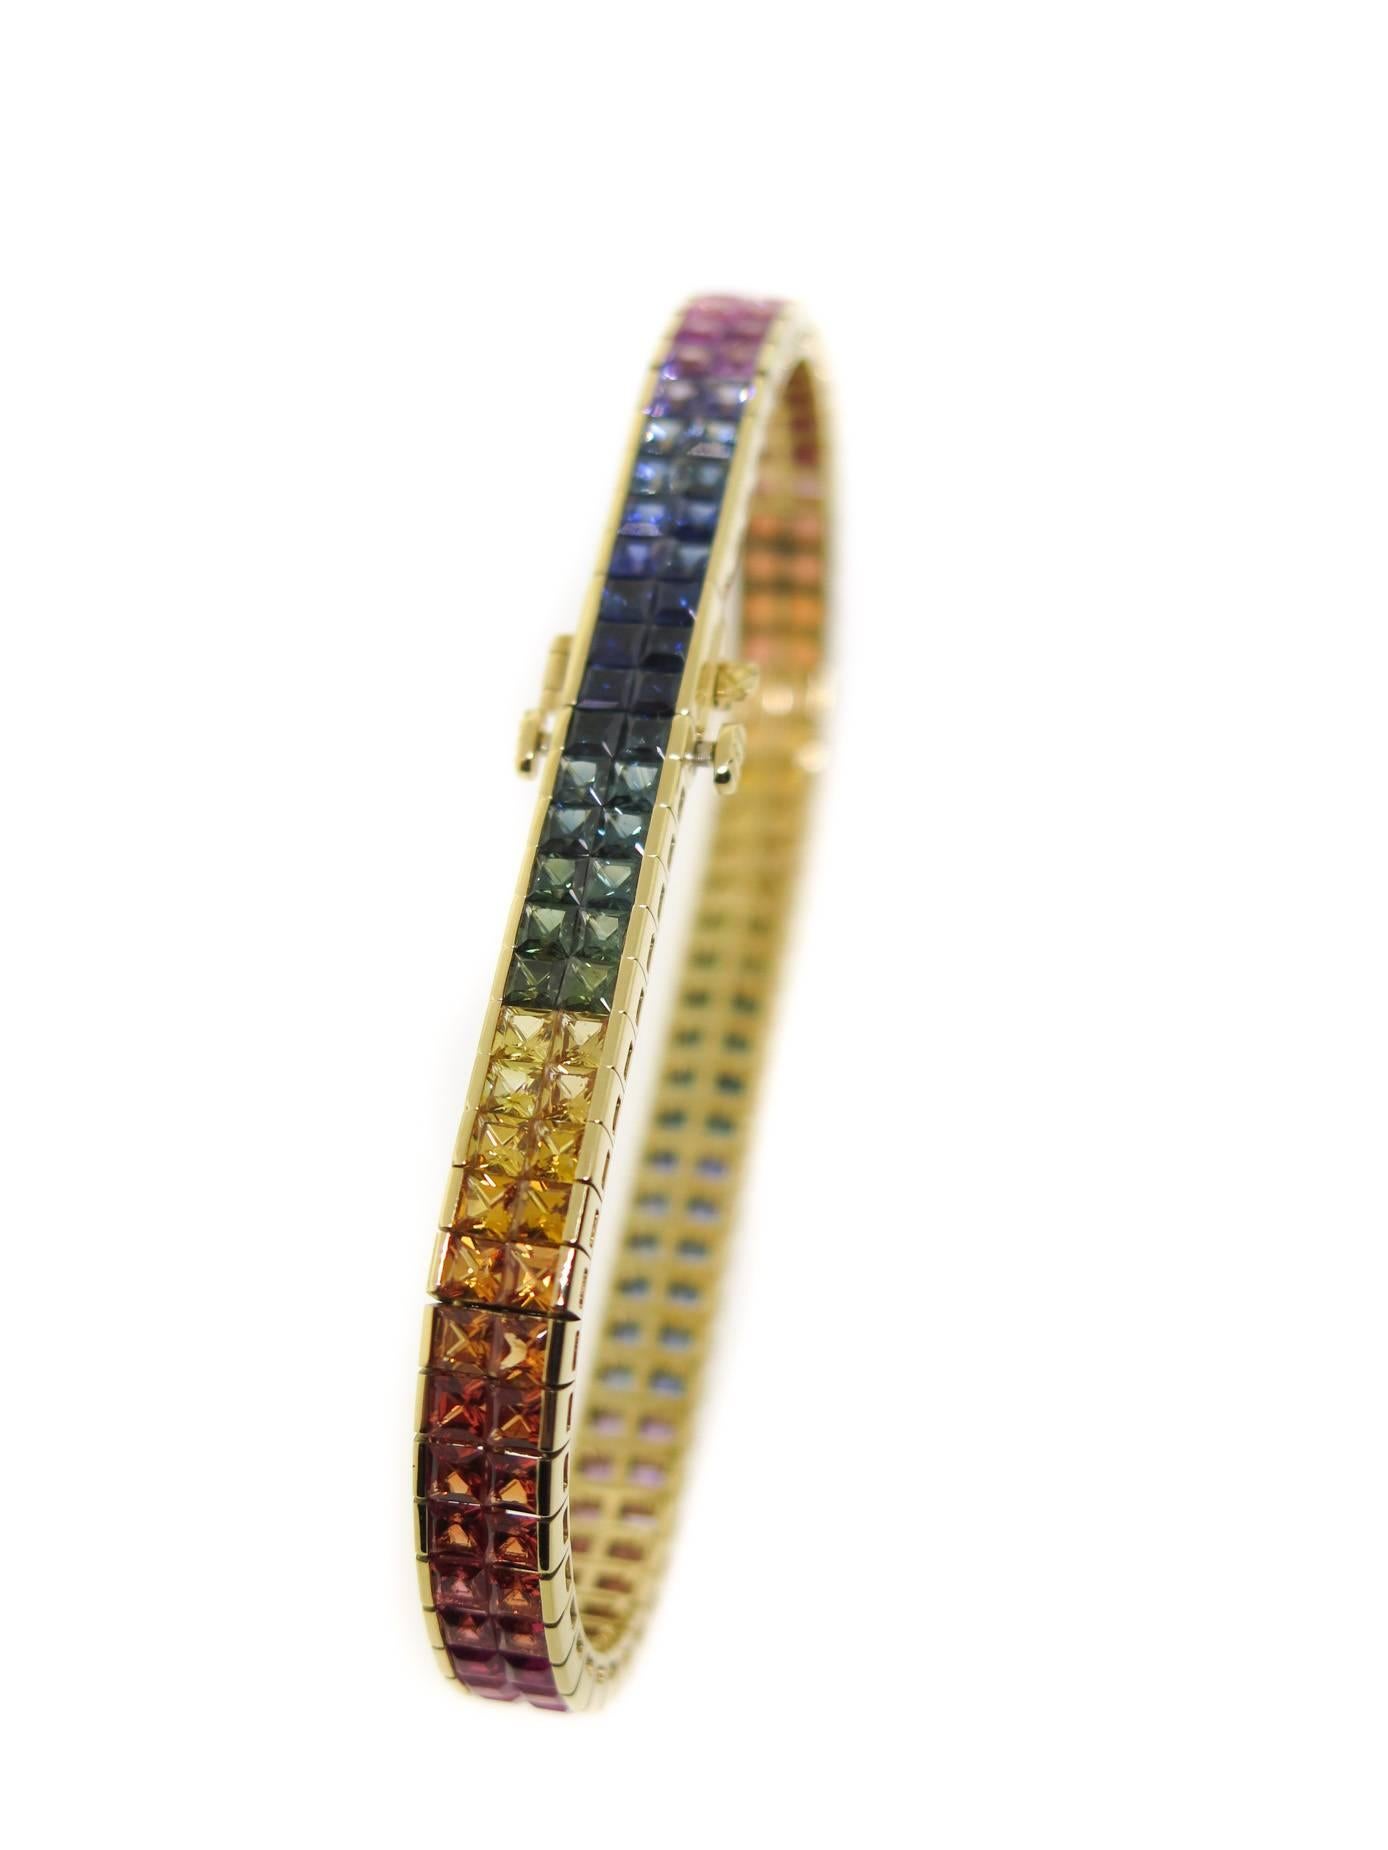 Stunning and beautiful! This rainbow sapphire bracelet features a double row of perfectly matched selection of vibrant colors of sapphires: blue, green, pink, yellow, orange and all the colors in between. Designed and hand crafted in 18K yellow gold